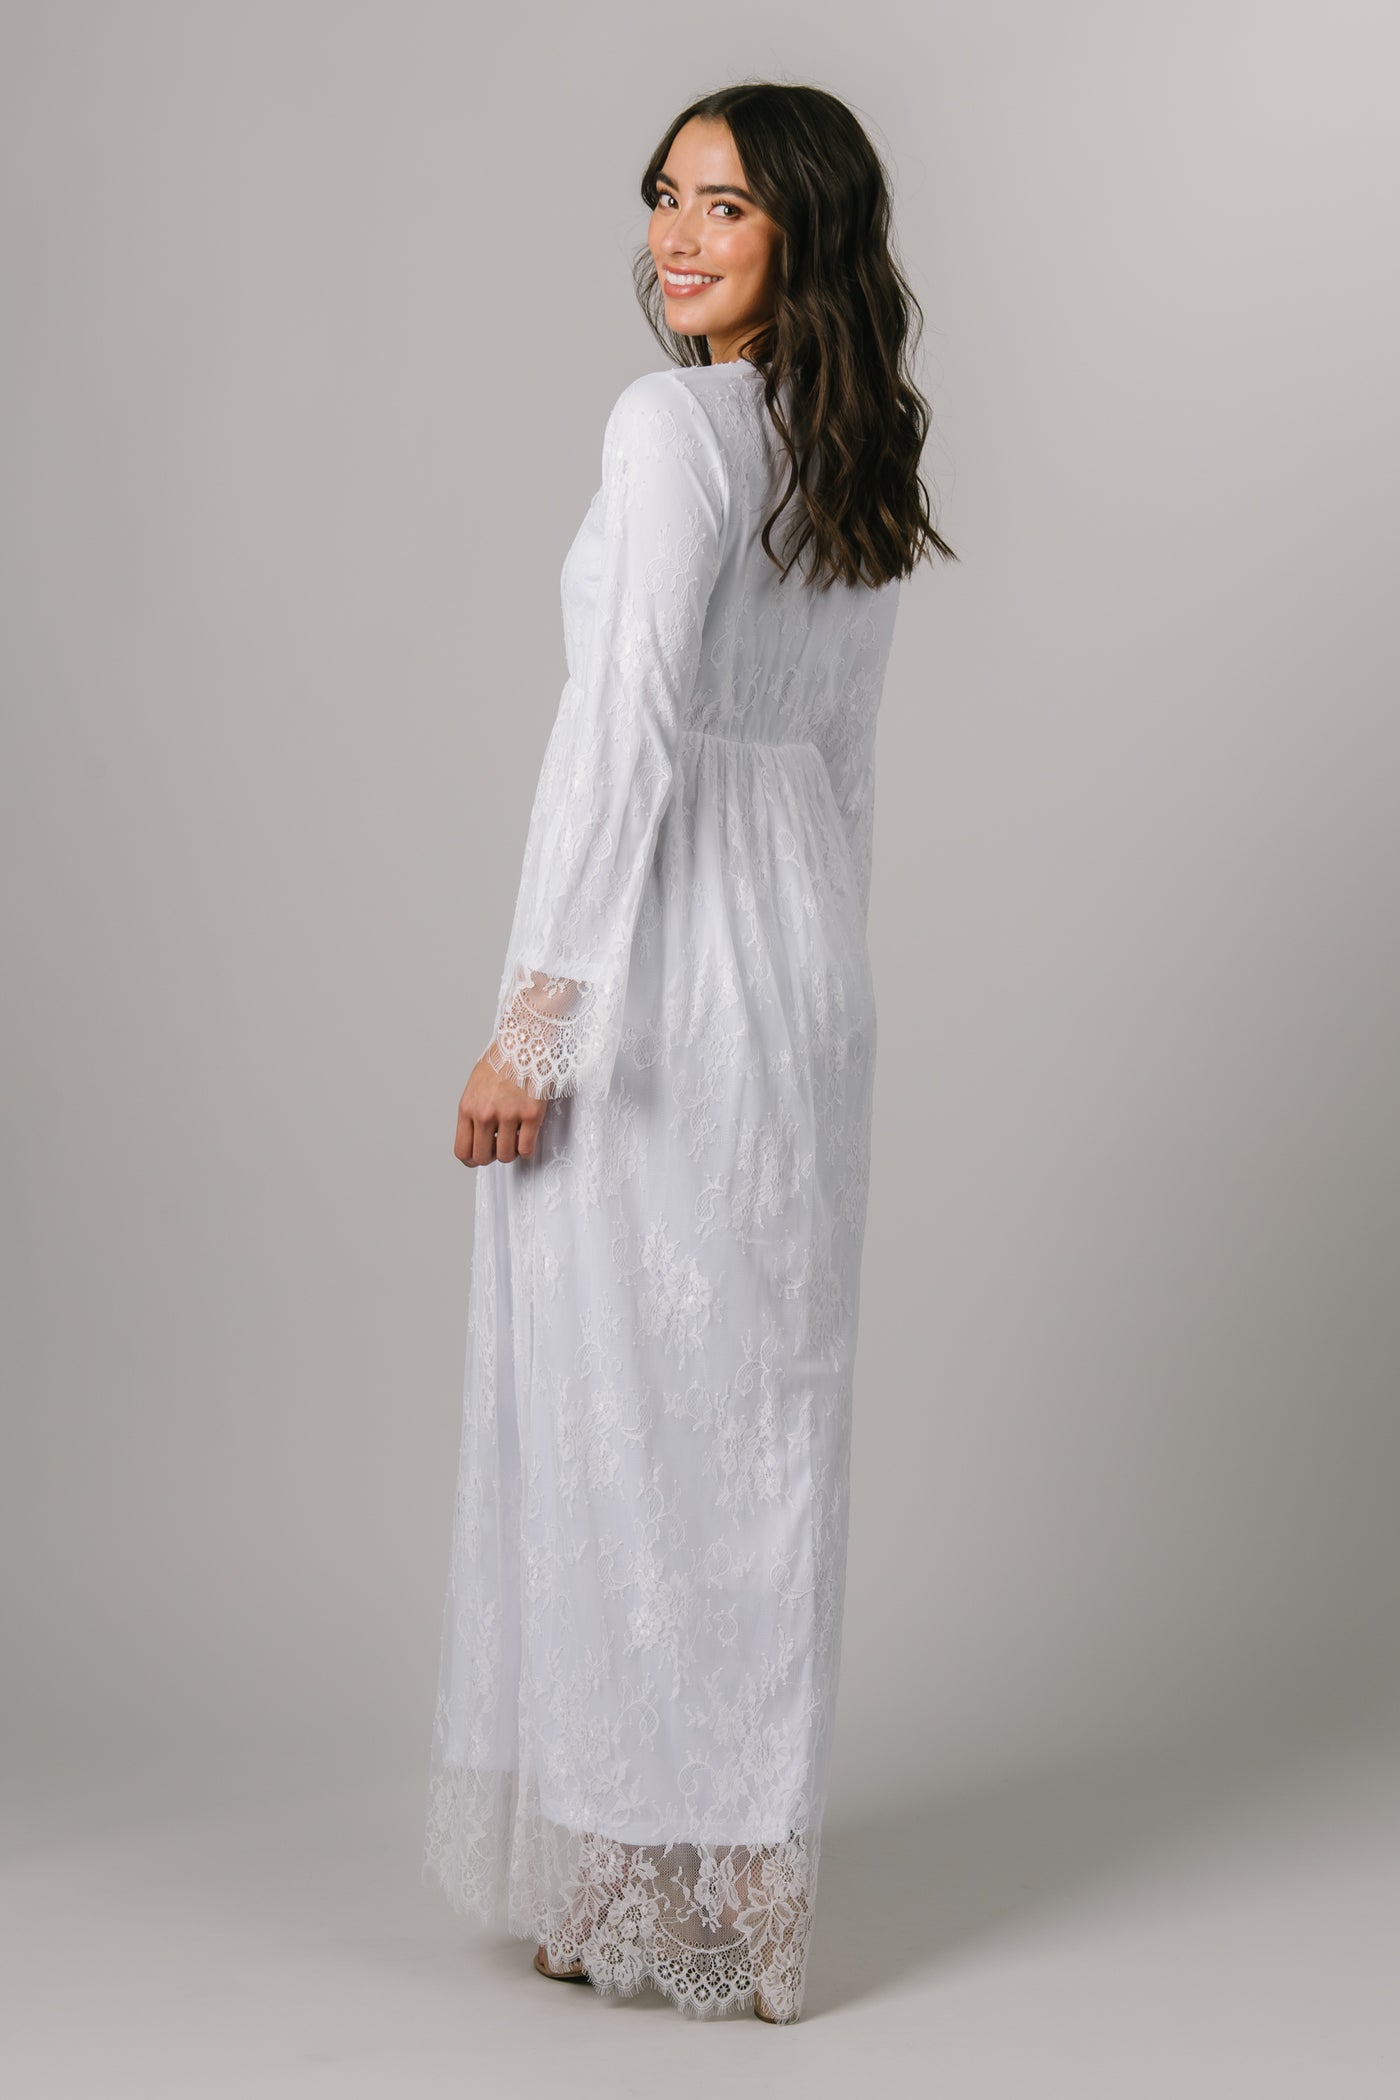 This Modest Temple dress features an all over lace pattern with an overhang of lace on the sleeves and hem! - Modest Temple Dresses - Modest Dresses - Temple Dresses